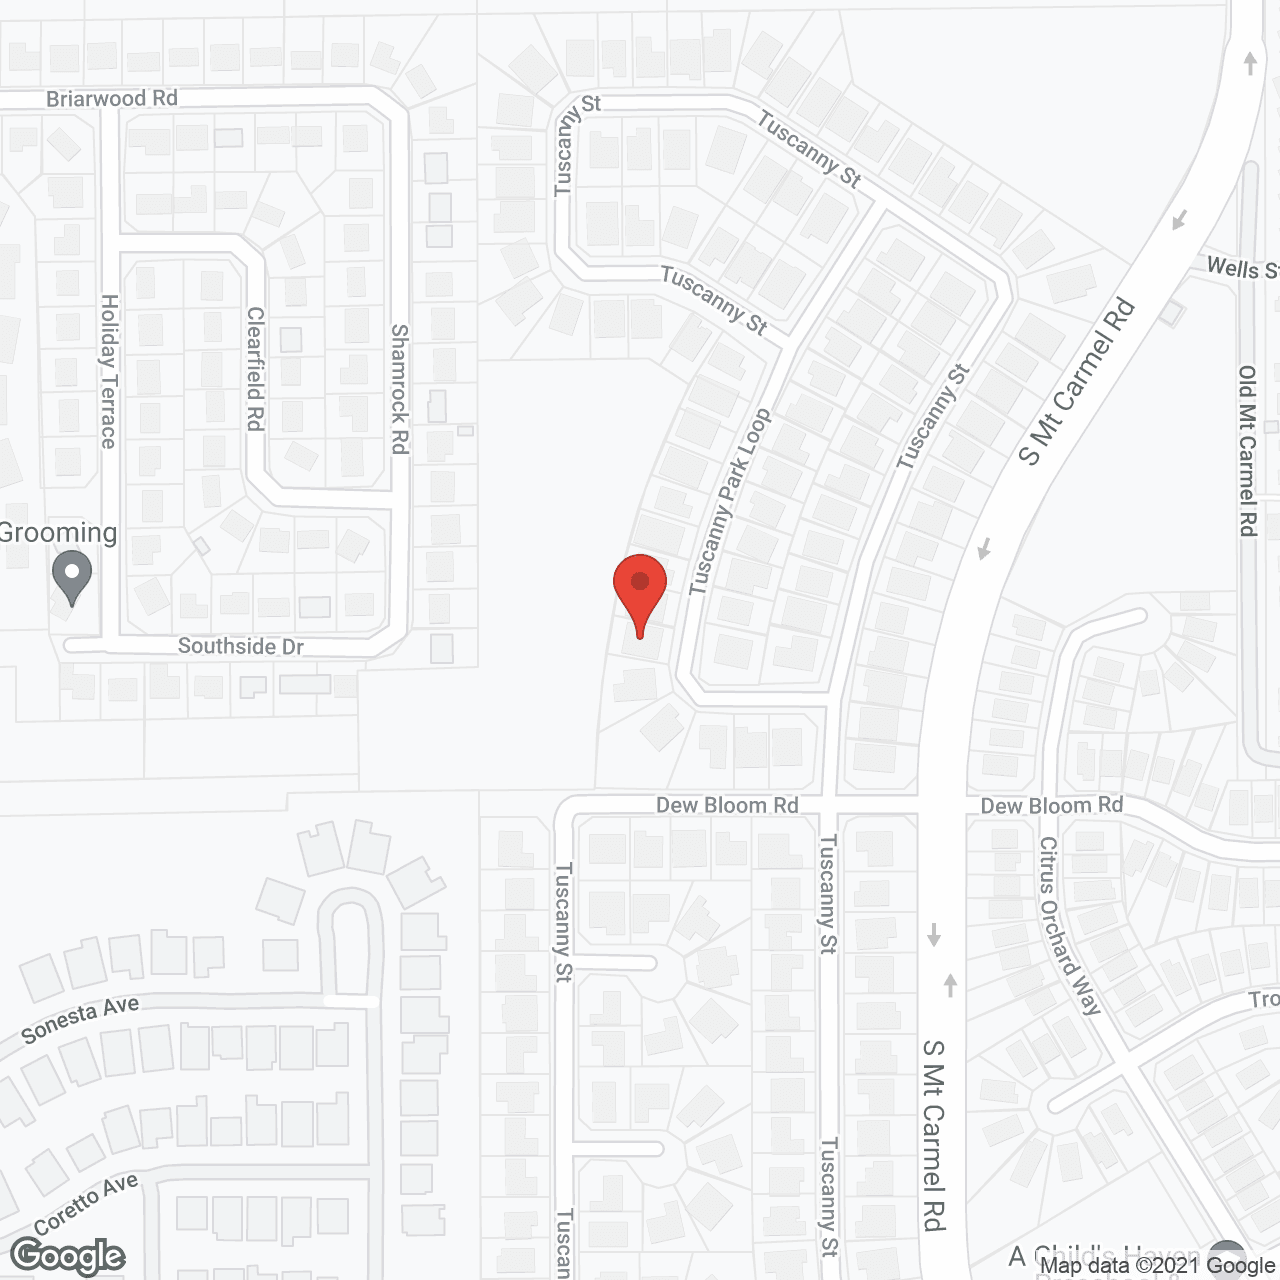 The Atrium Assisted Living Fac in google map